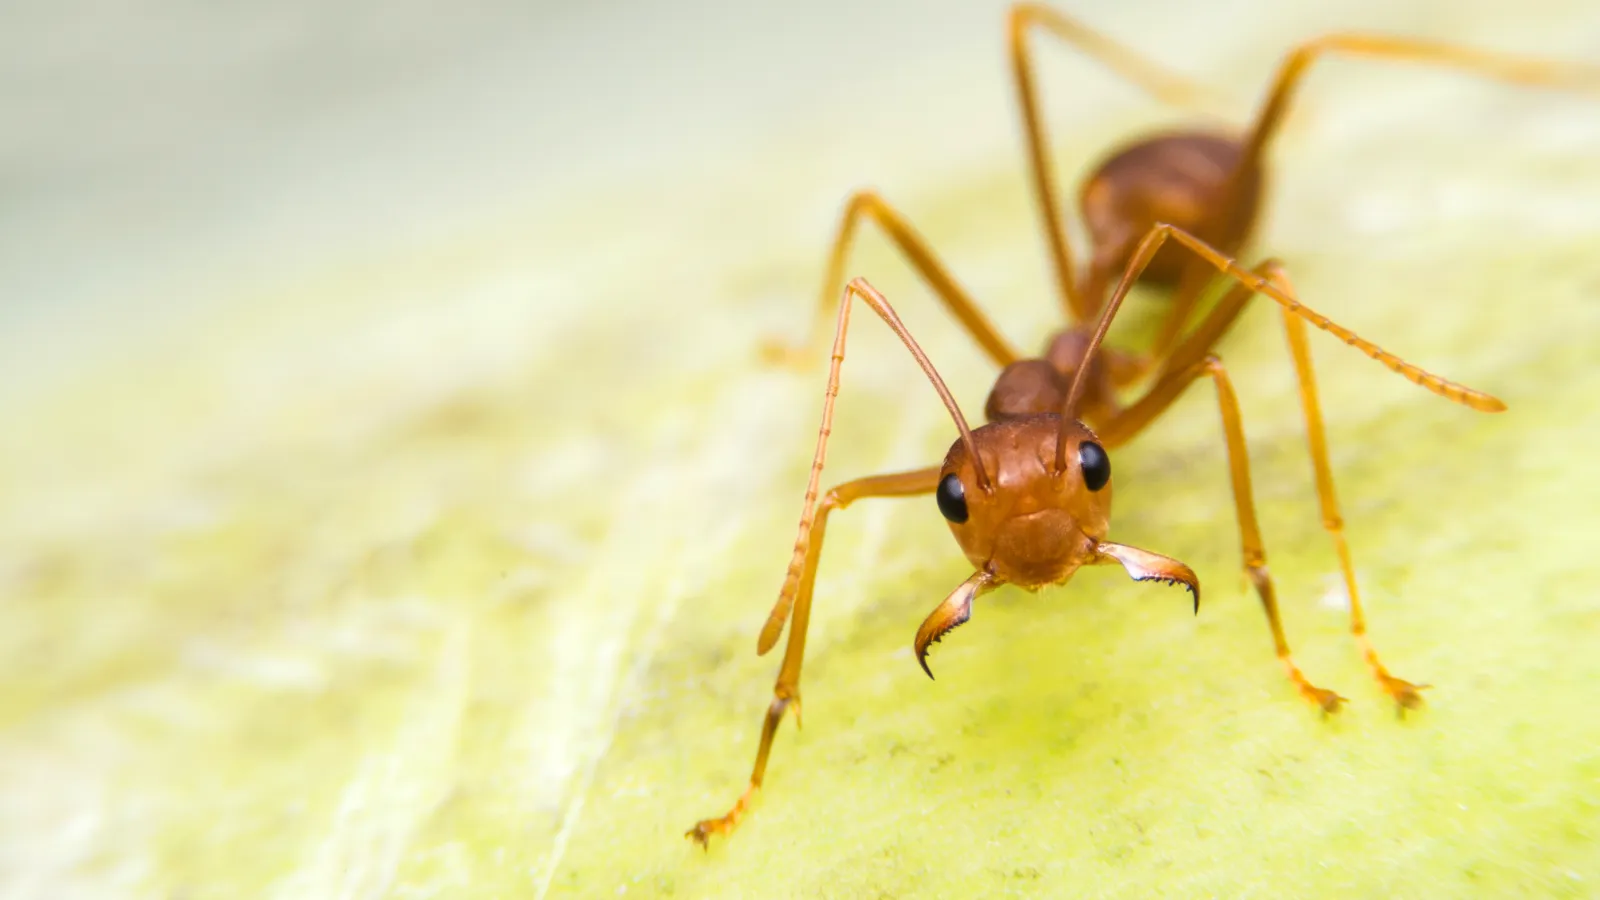 a close-up of a fire ant